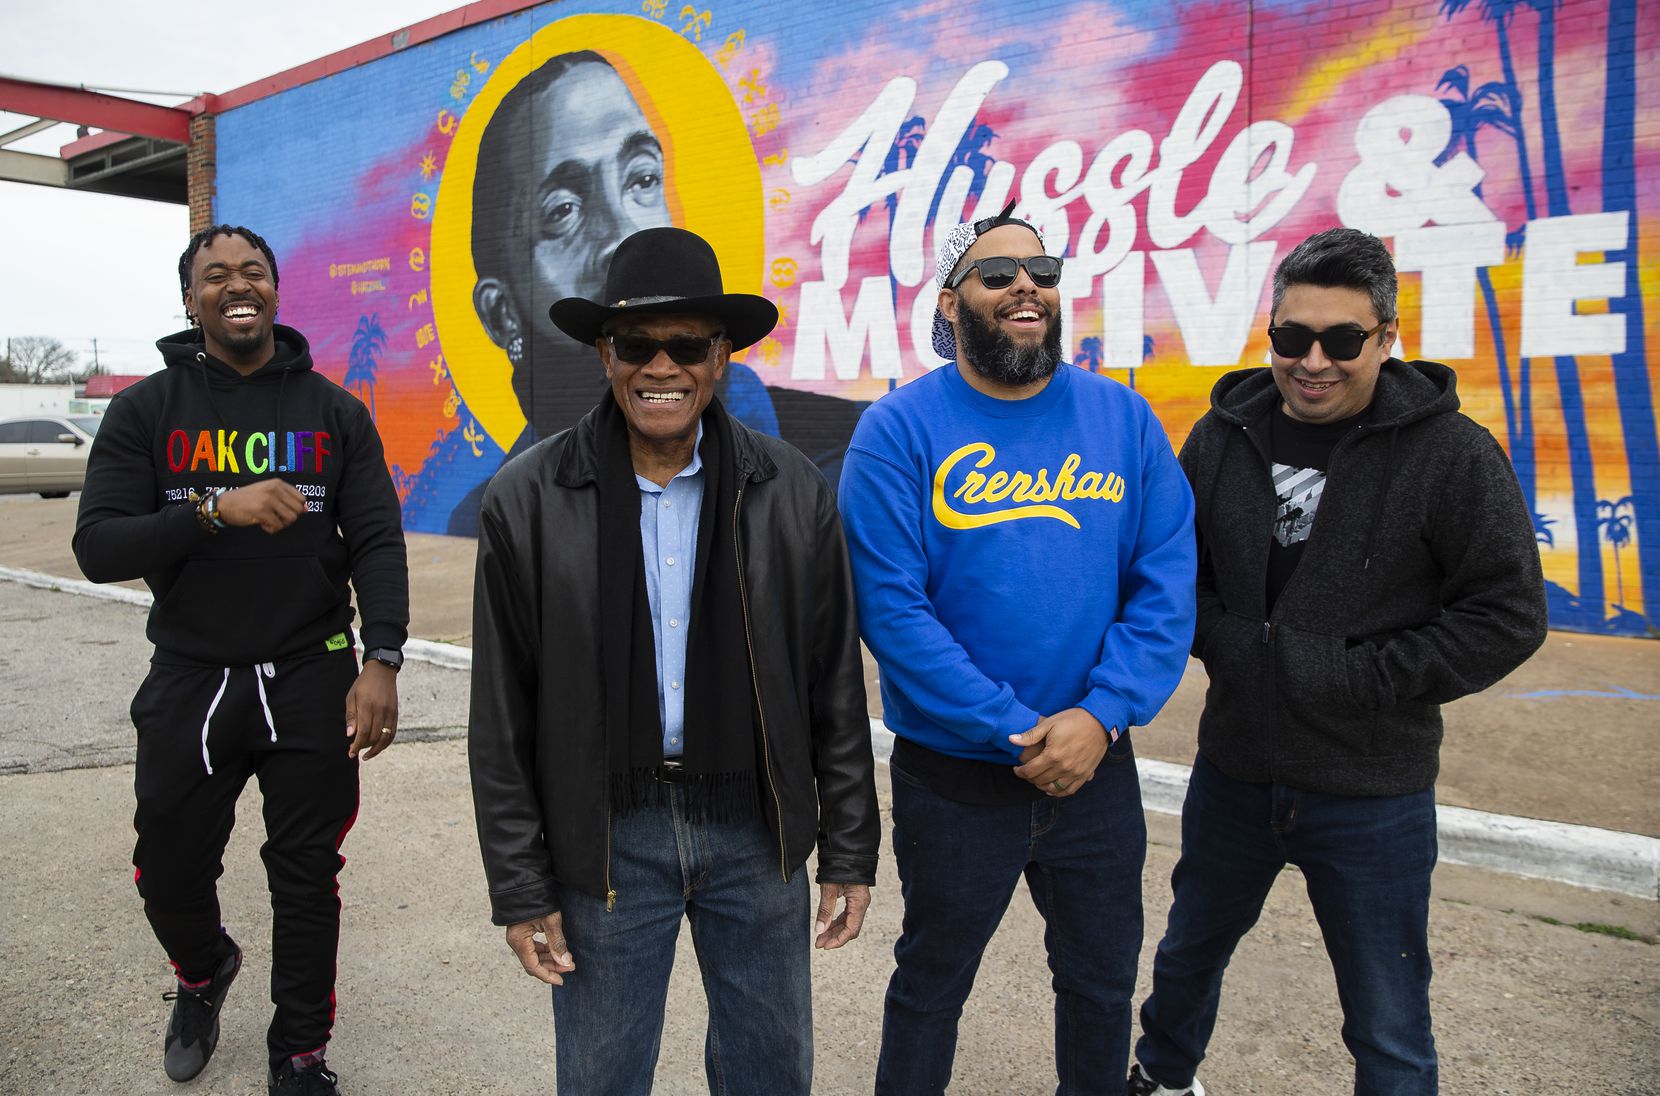 (From left) Taylor Toynes, executive director of For Oak Cliff, Al Herron, Glendale Shopping Center owner, and artists Jeremy Biggers and Hatziel Flores pose in front of the mural dedicated to the late rapper, entrepreneur and community activist Nipsey Hussle at the Glendale Shopping Center on Feb. 22, 2020 in Dallas.